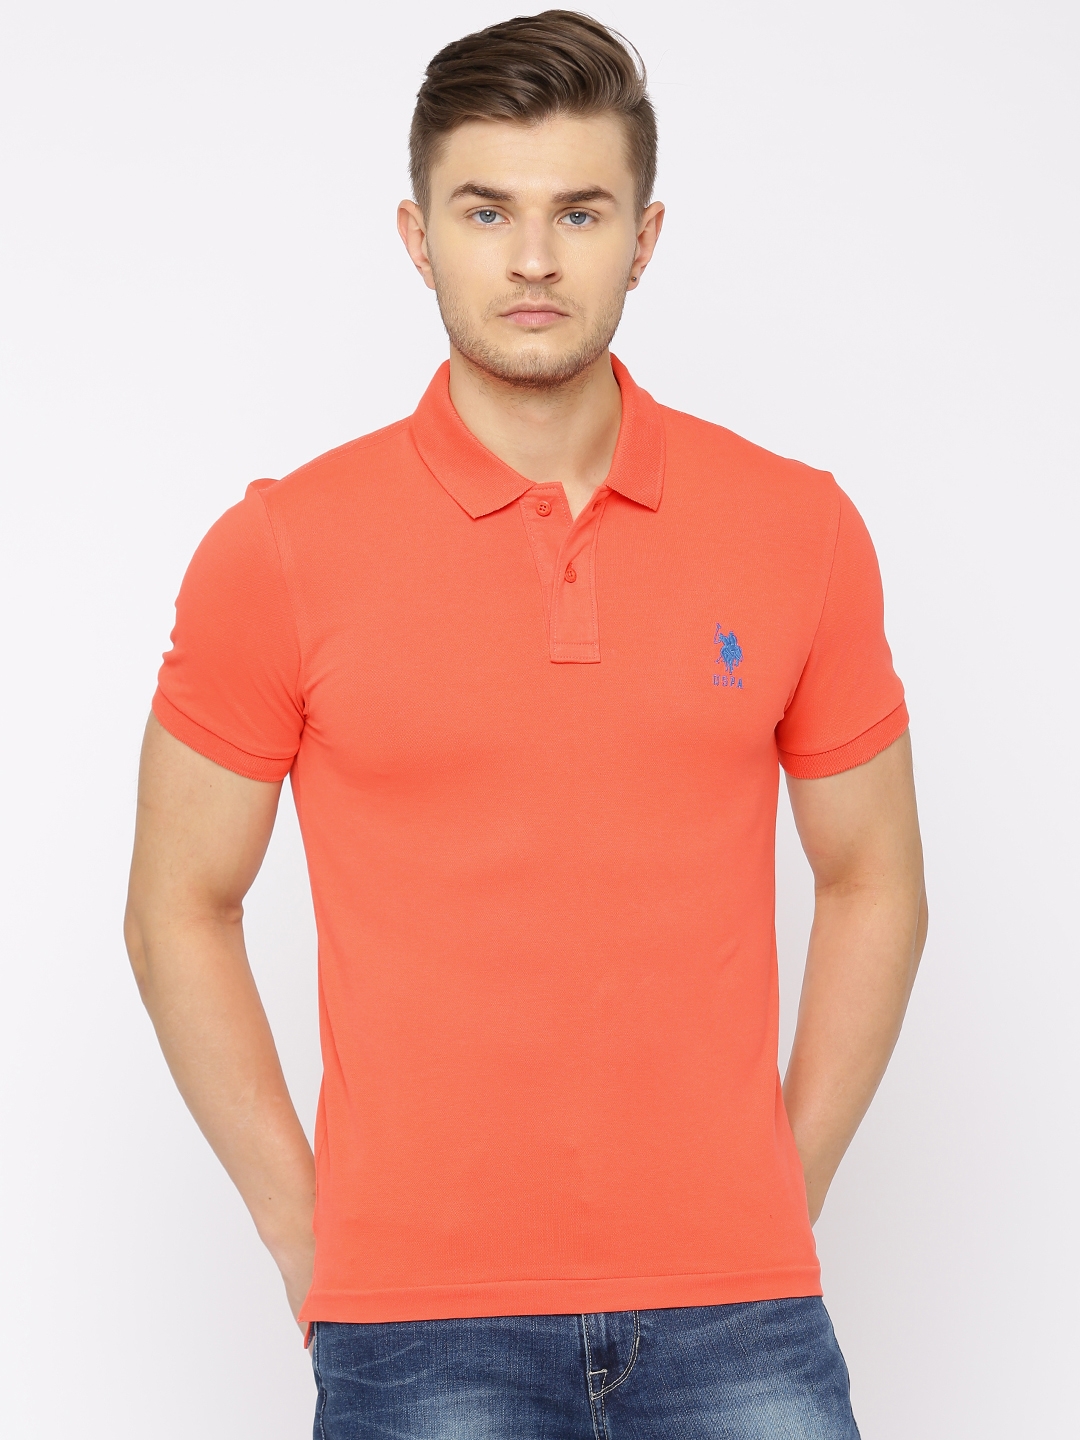 Mens Clothing T-shirts Polo shirts Pink for Men Sun 68 Cotton Polo Shirt in Coral 